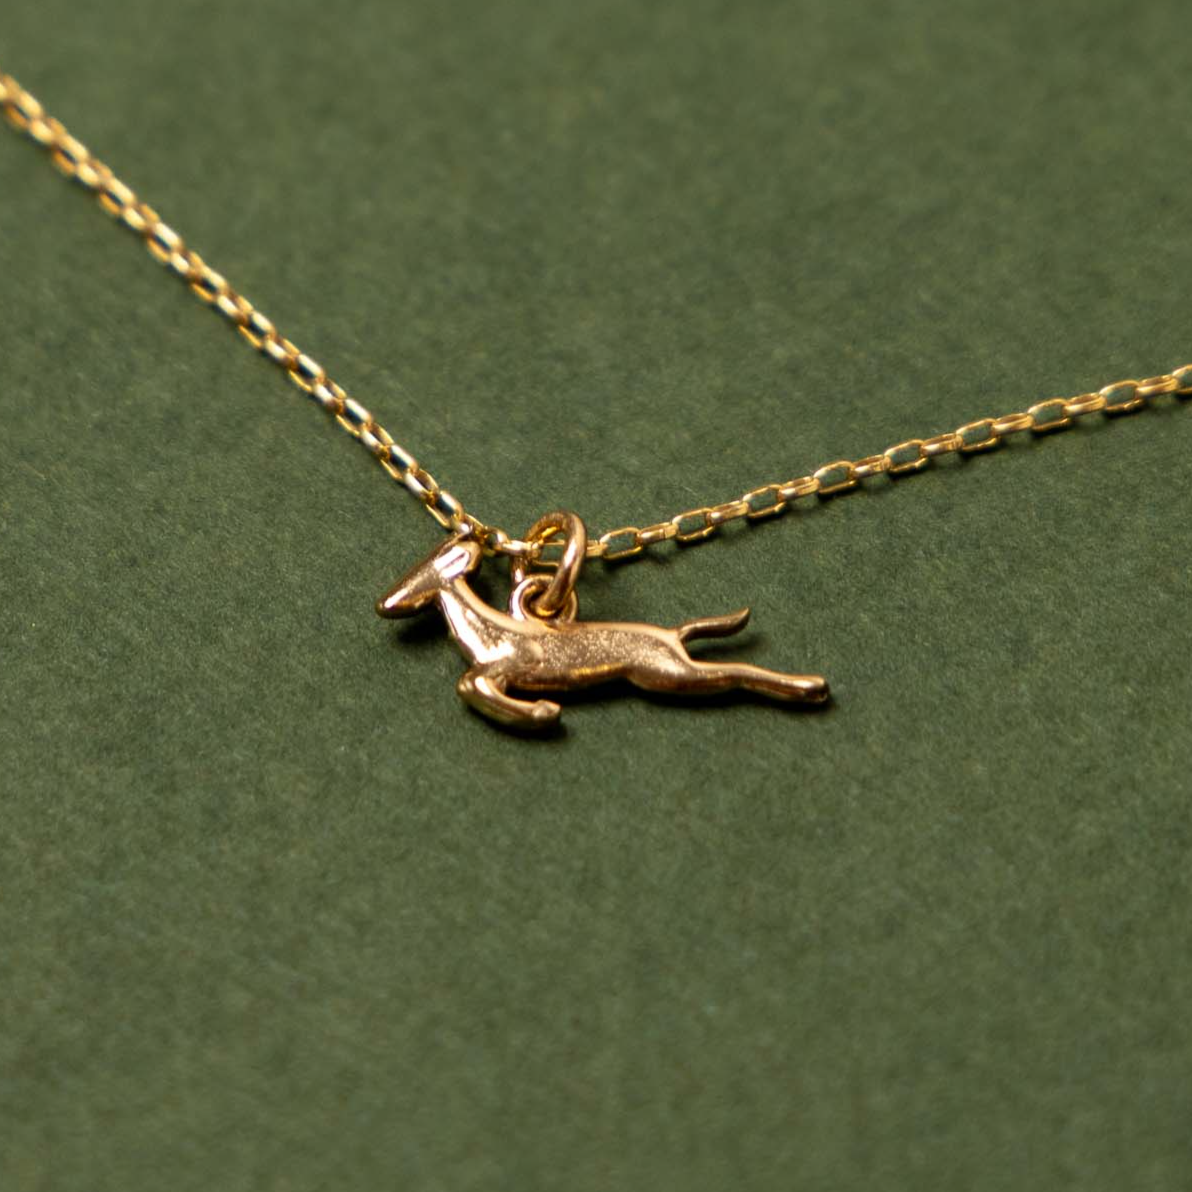 "I Love South Africa" Gold-Plated Dainty Springbok Necklace